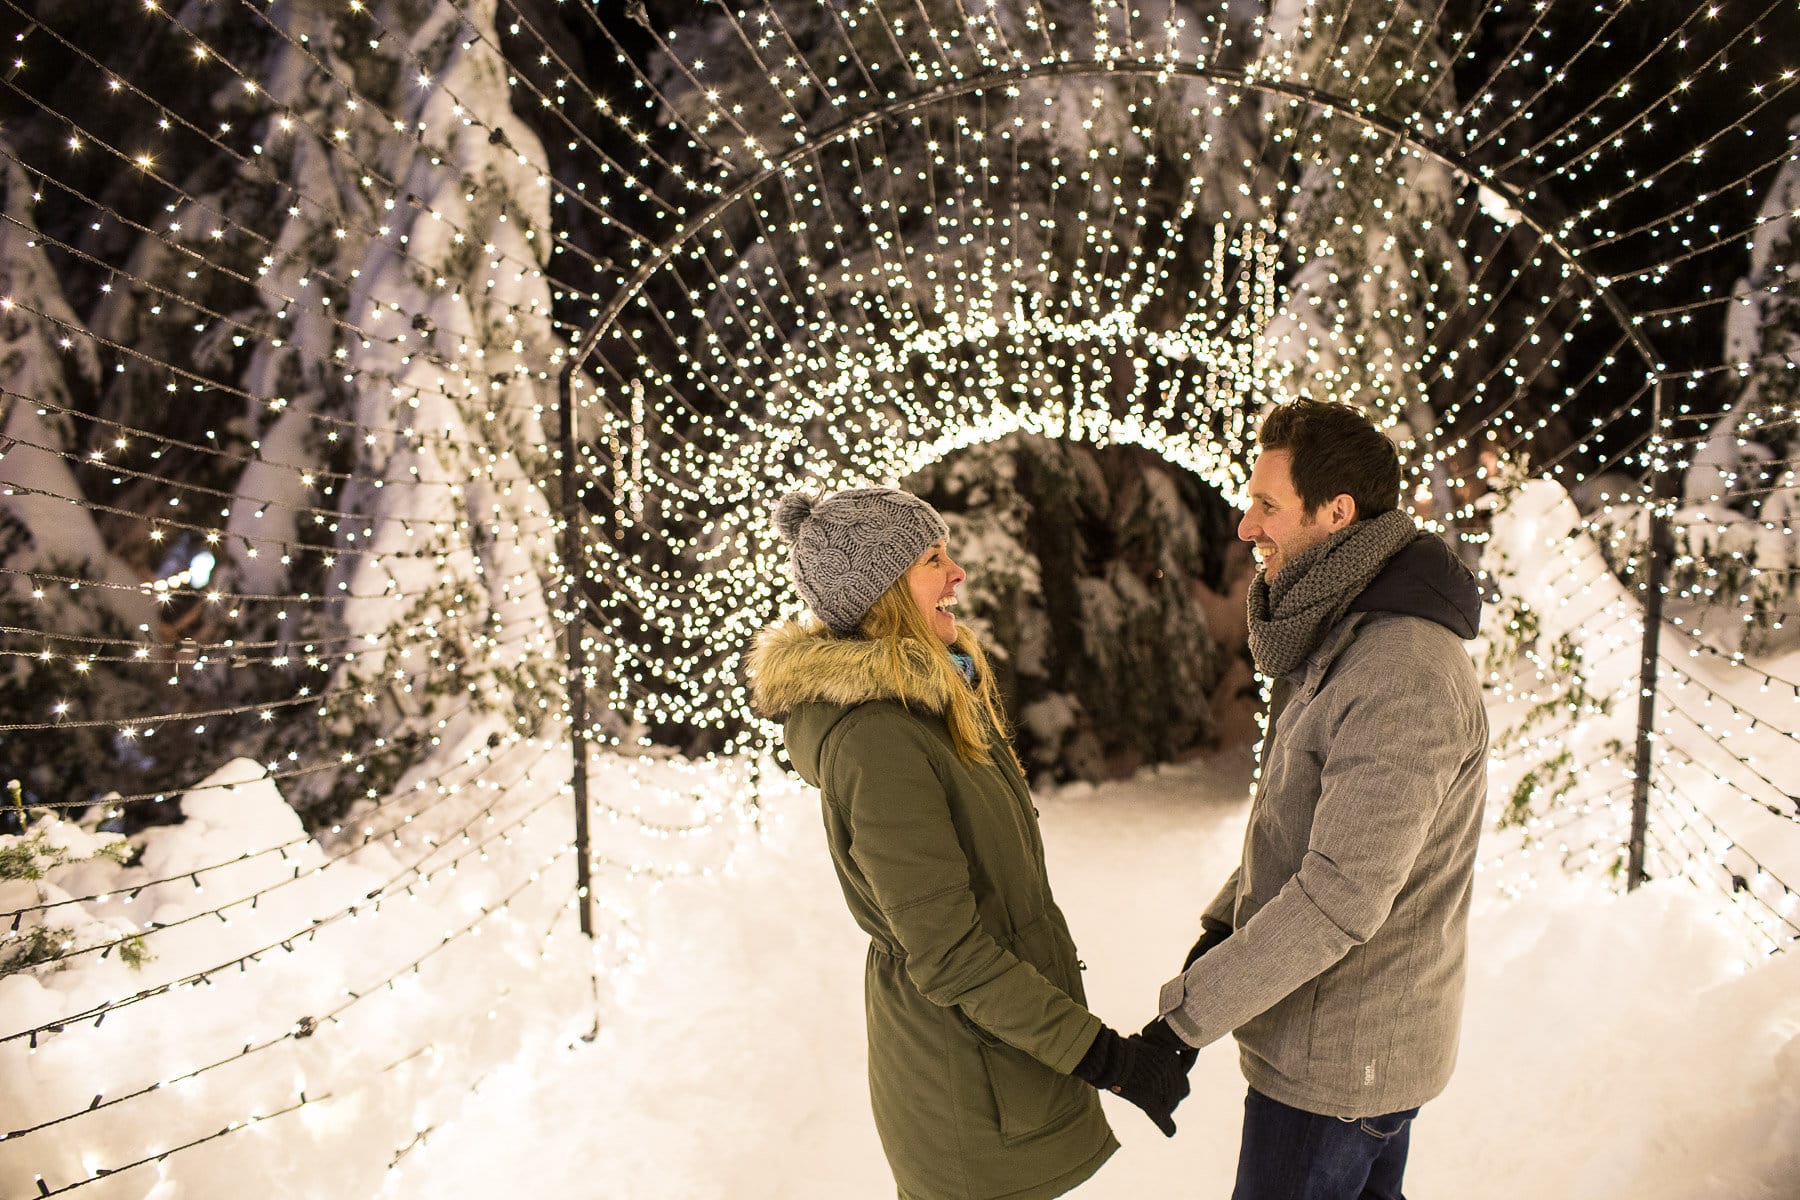 Vancouver's Best Winter Date Ideas During COVID-19